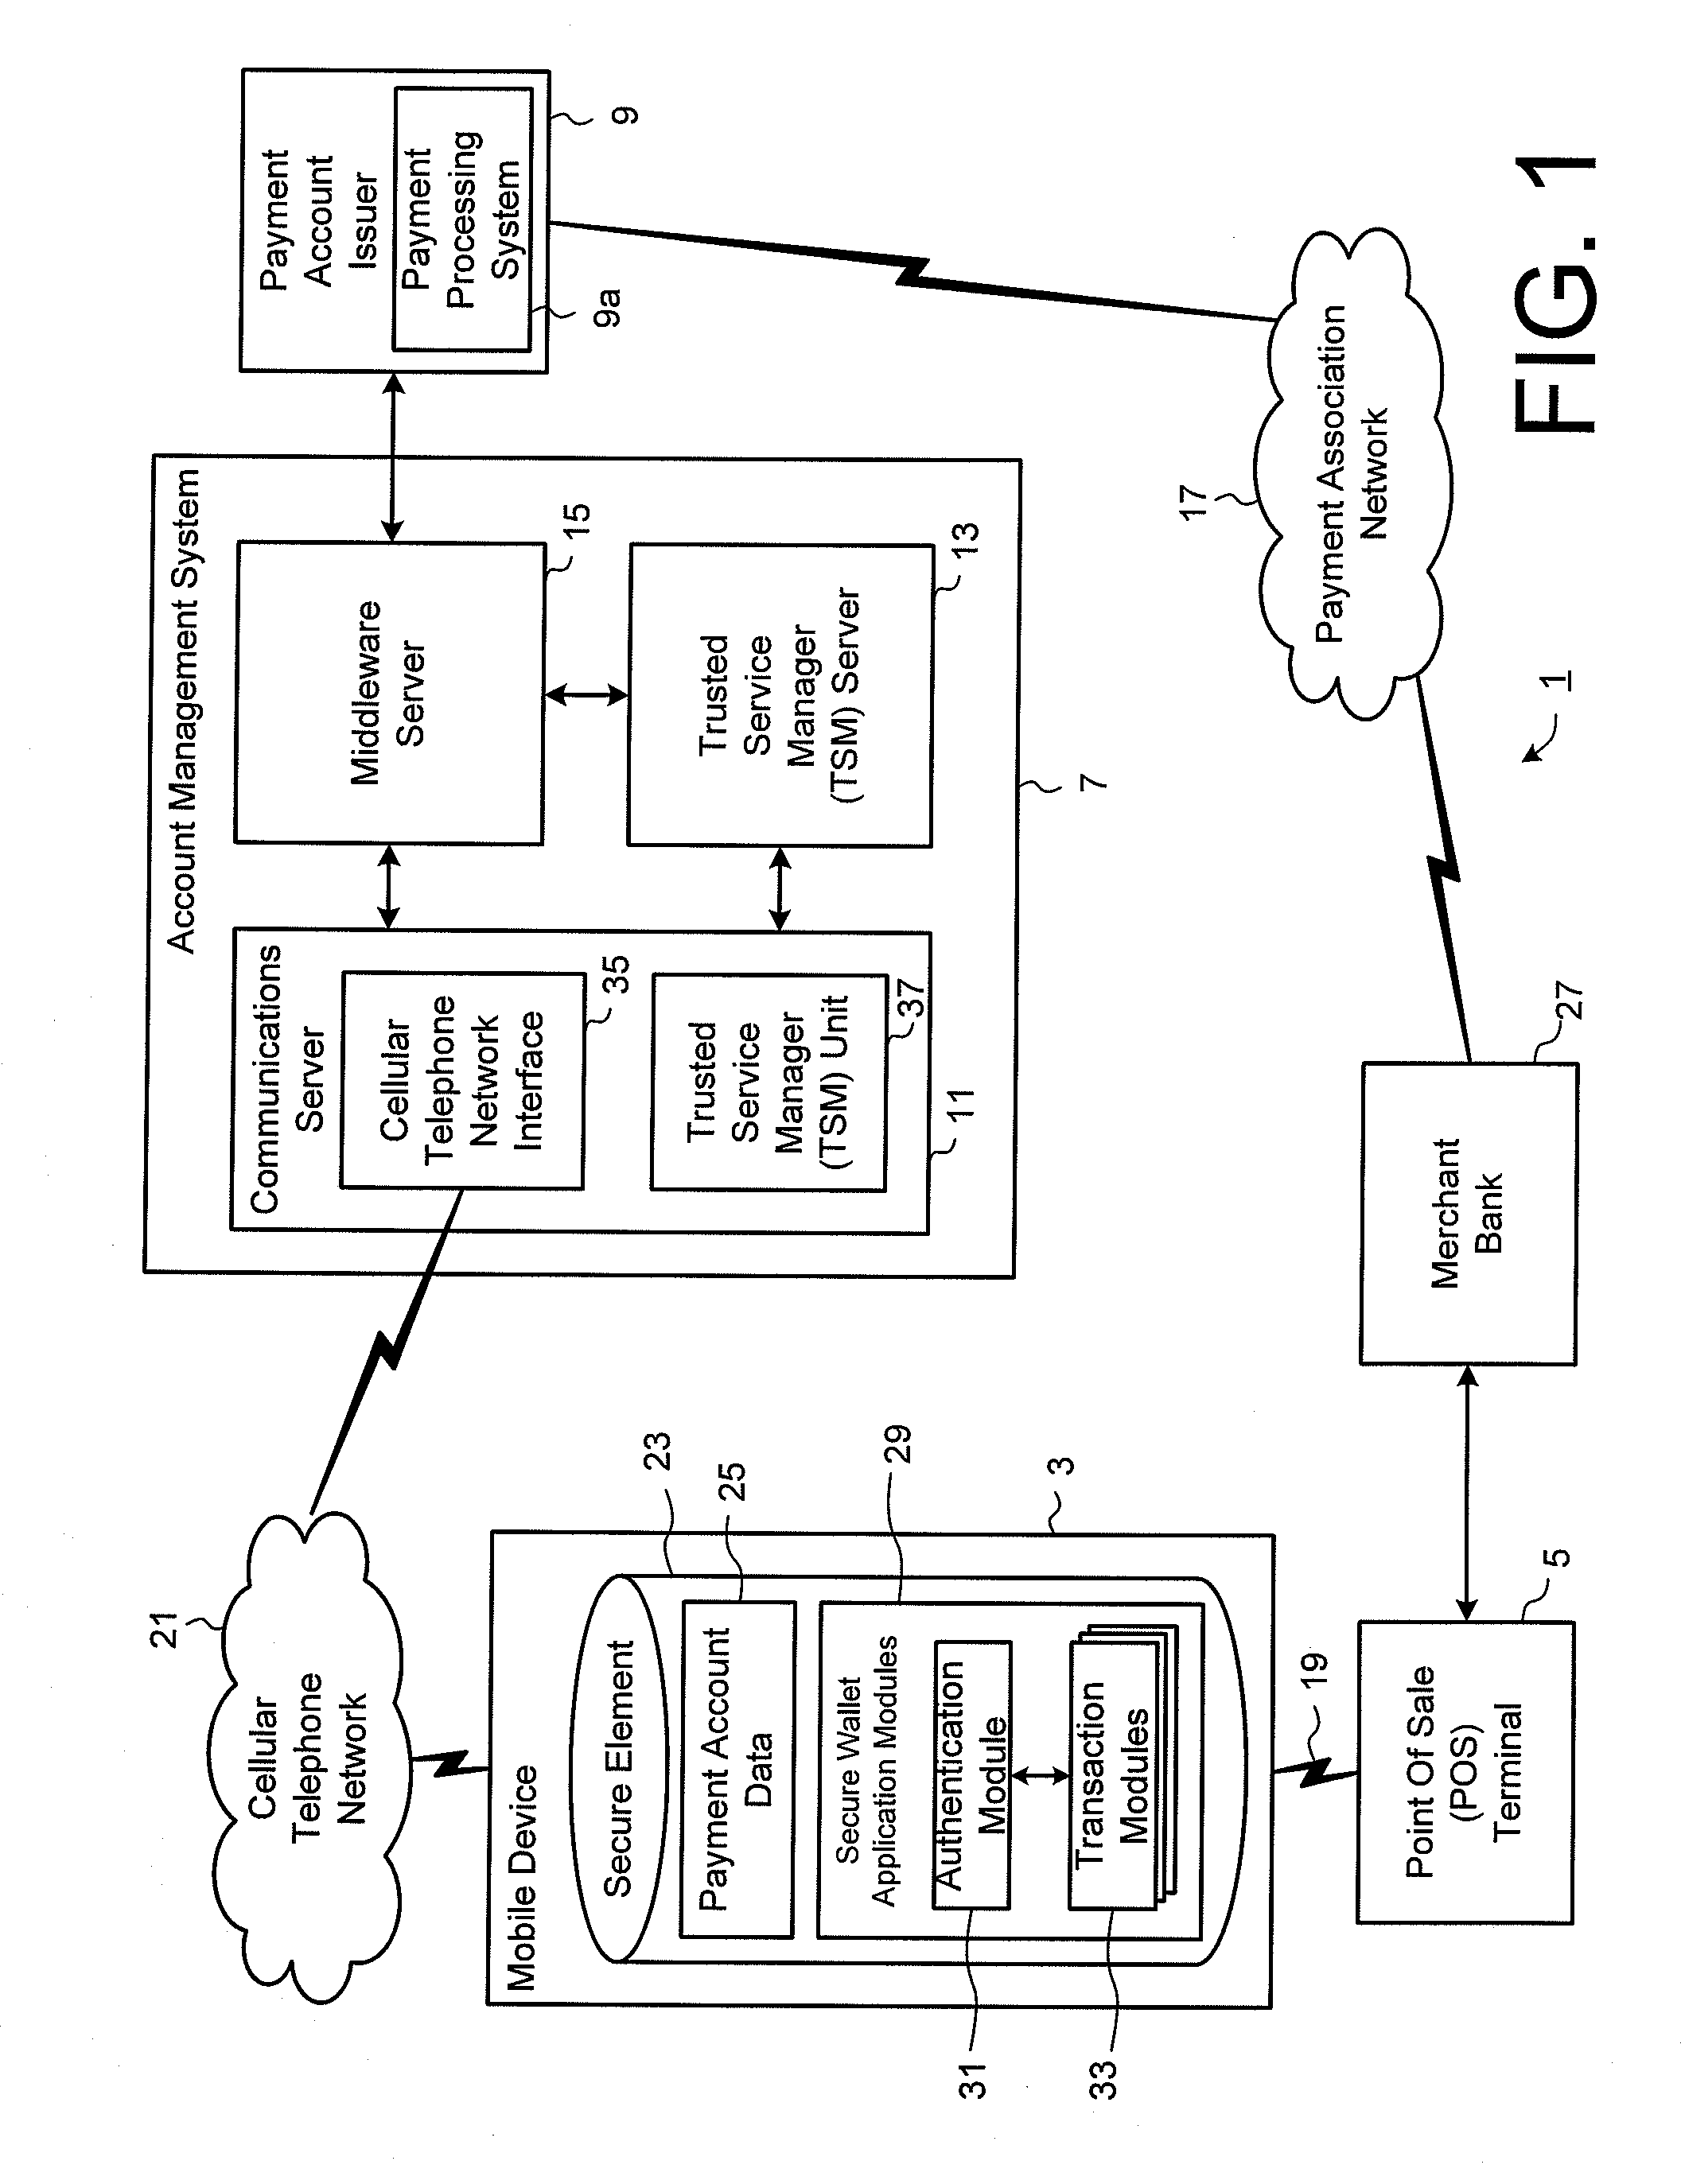 Method and System for Electronic Wallet Access